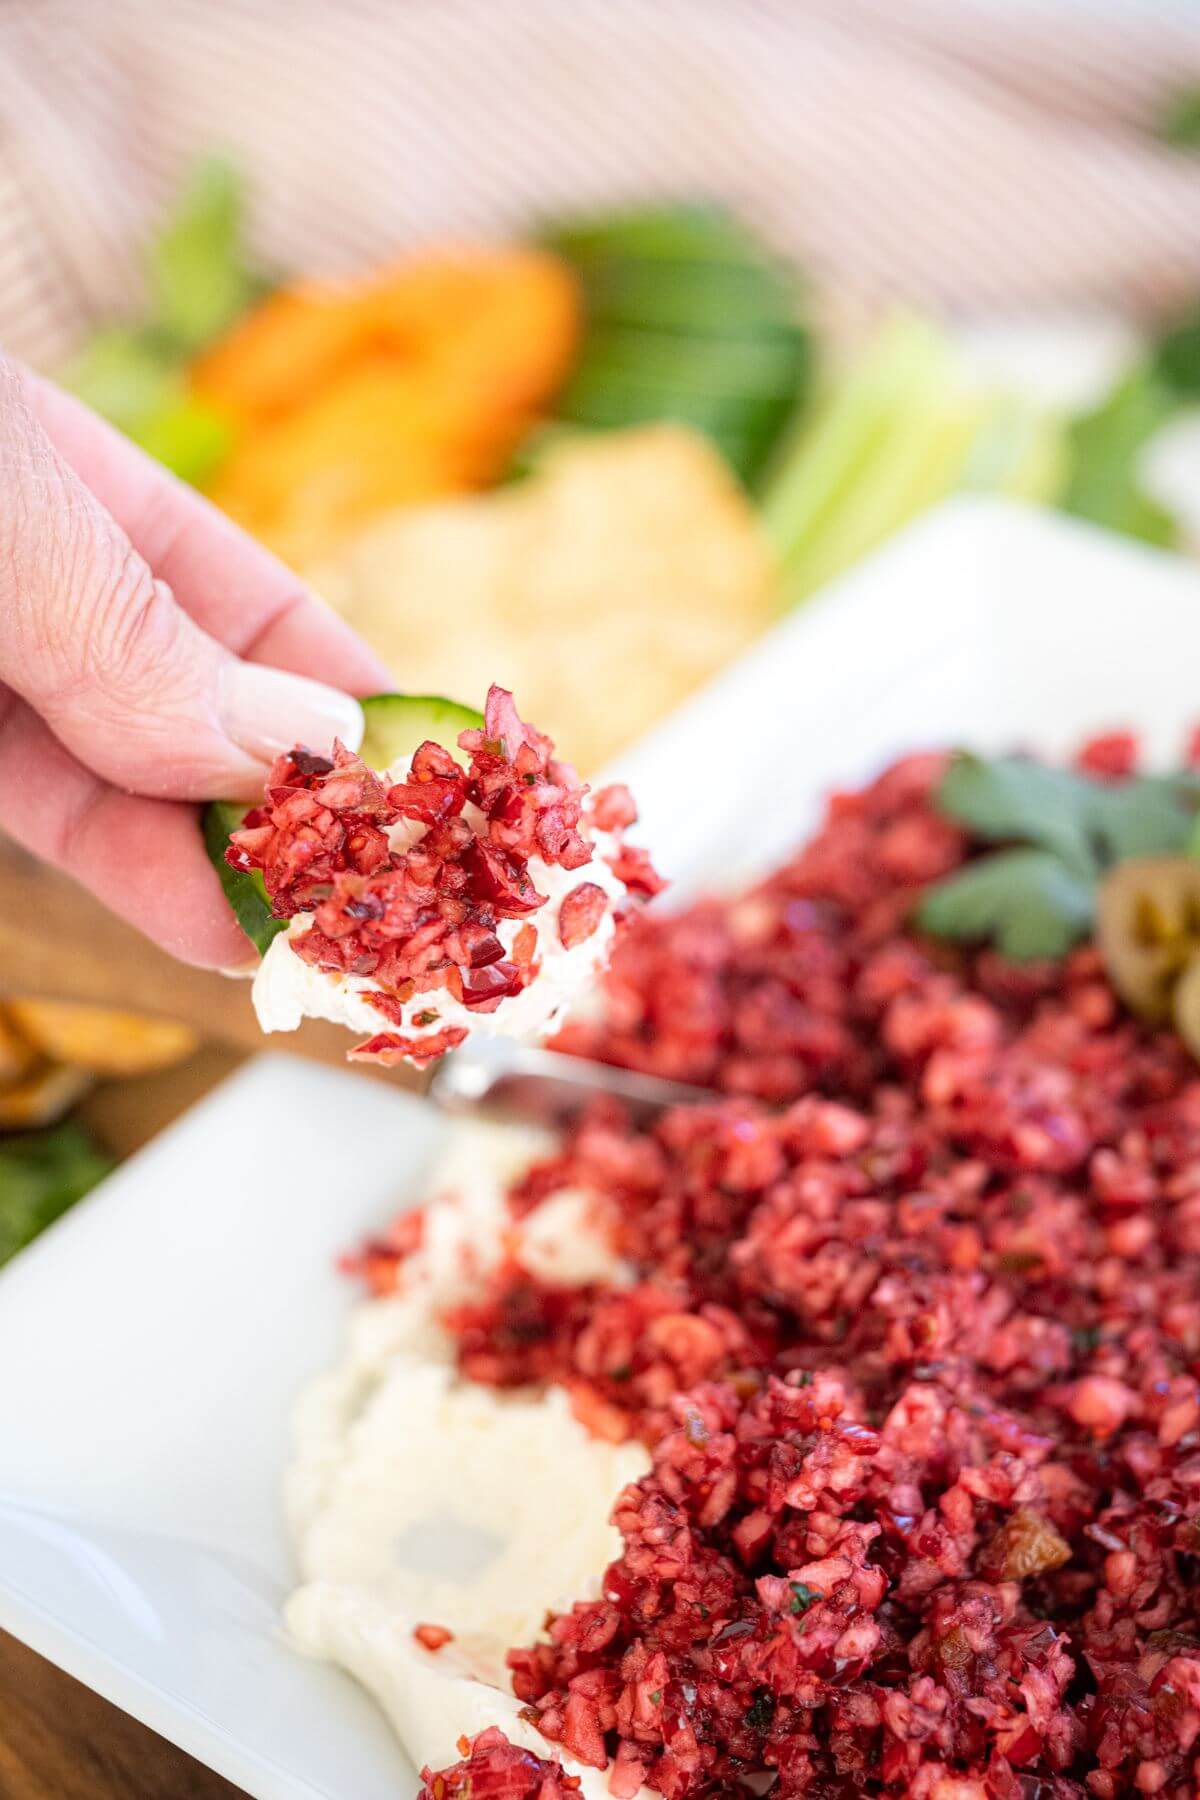 A hand dips a cucumber slice into the jalapeno cranberry dip.